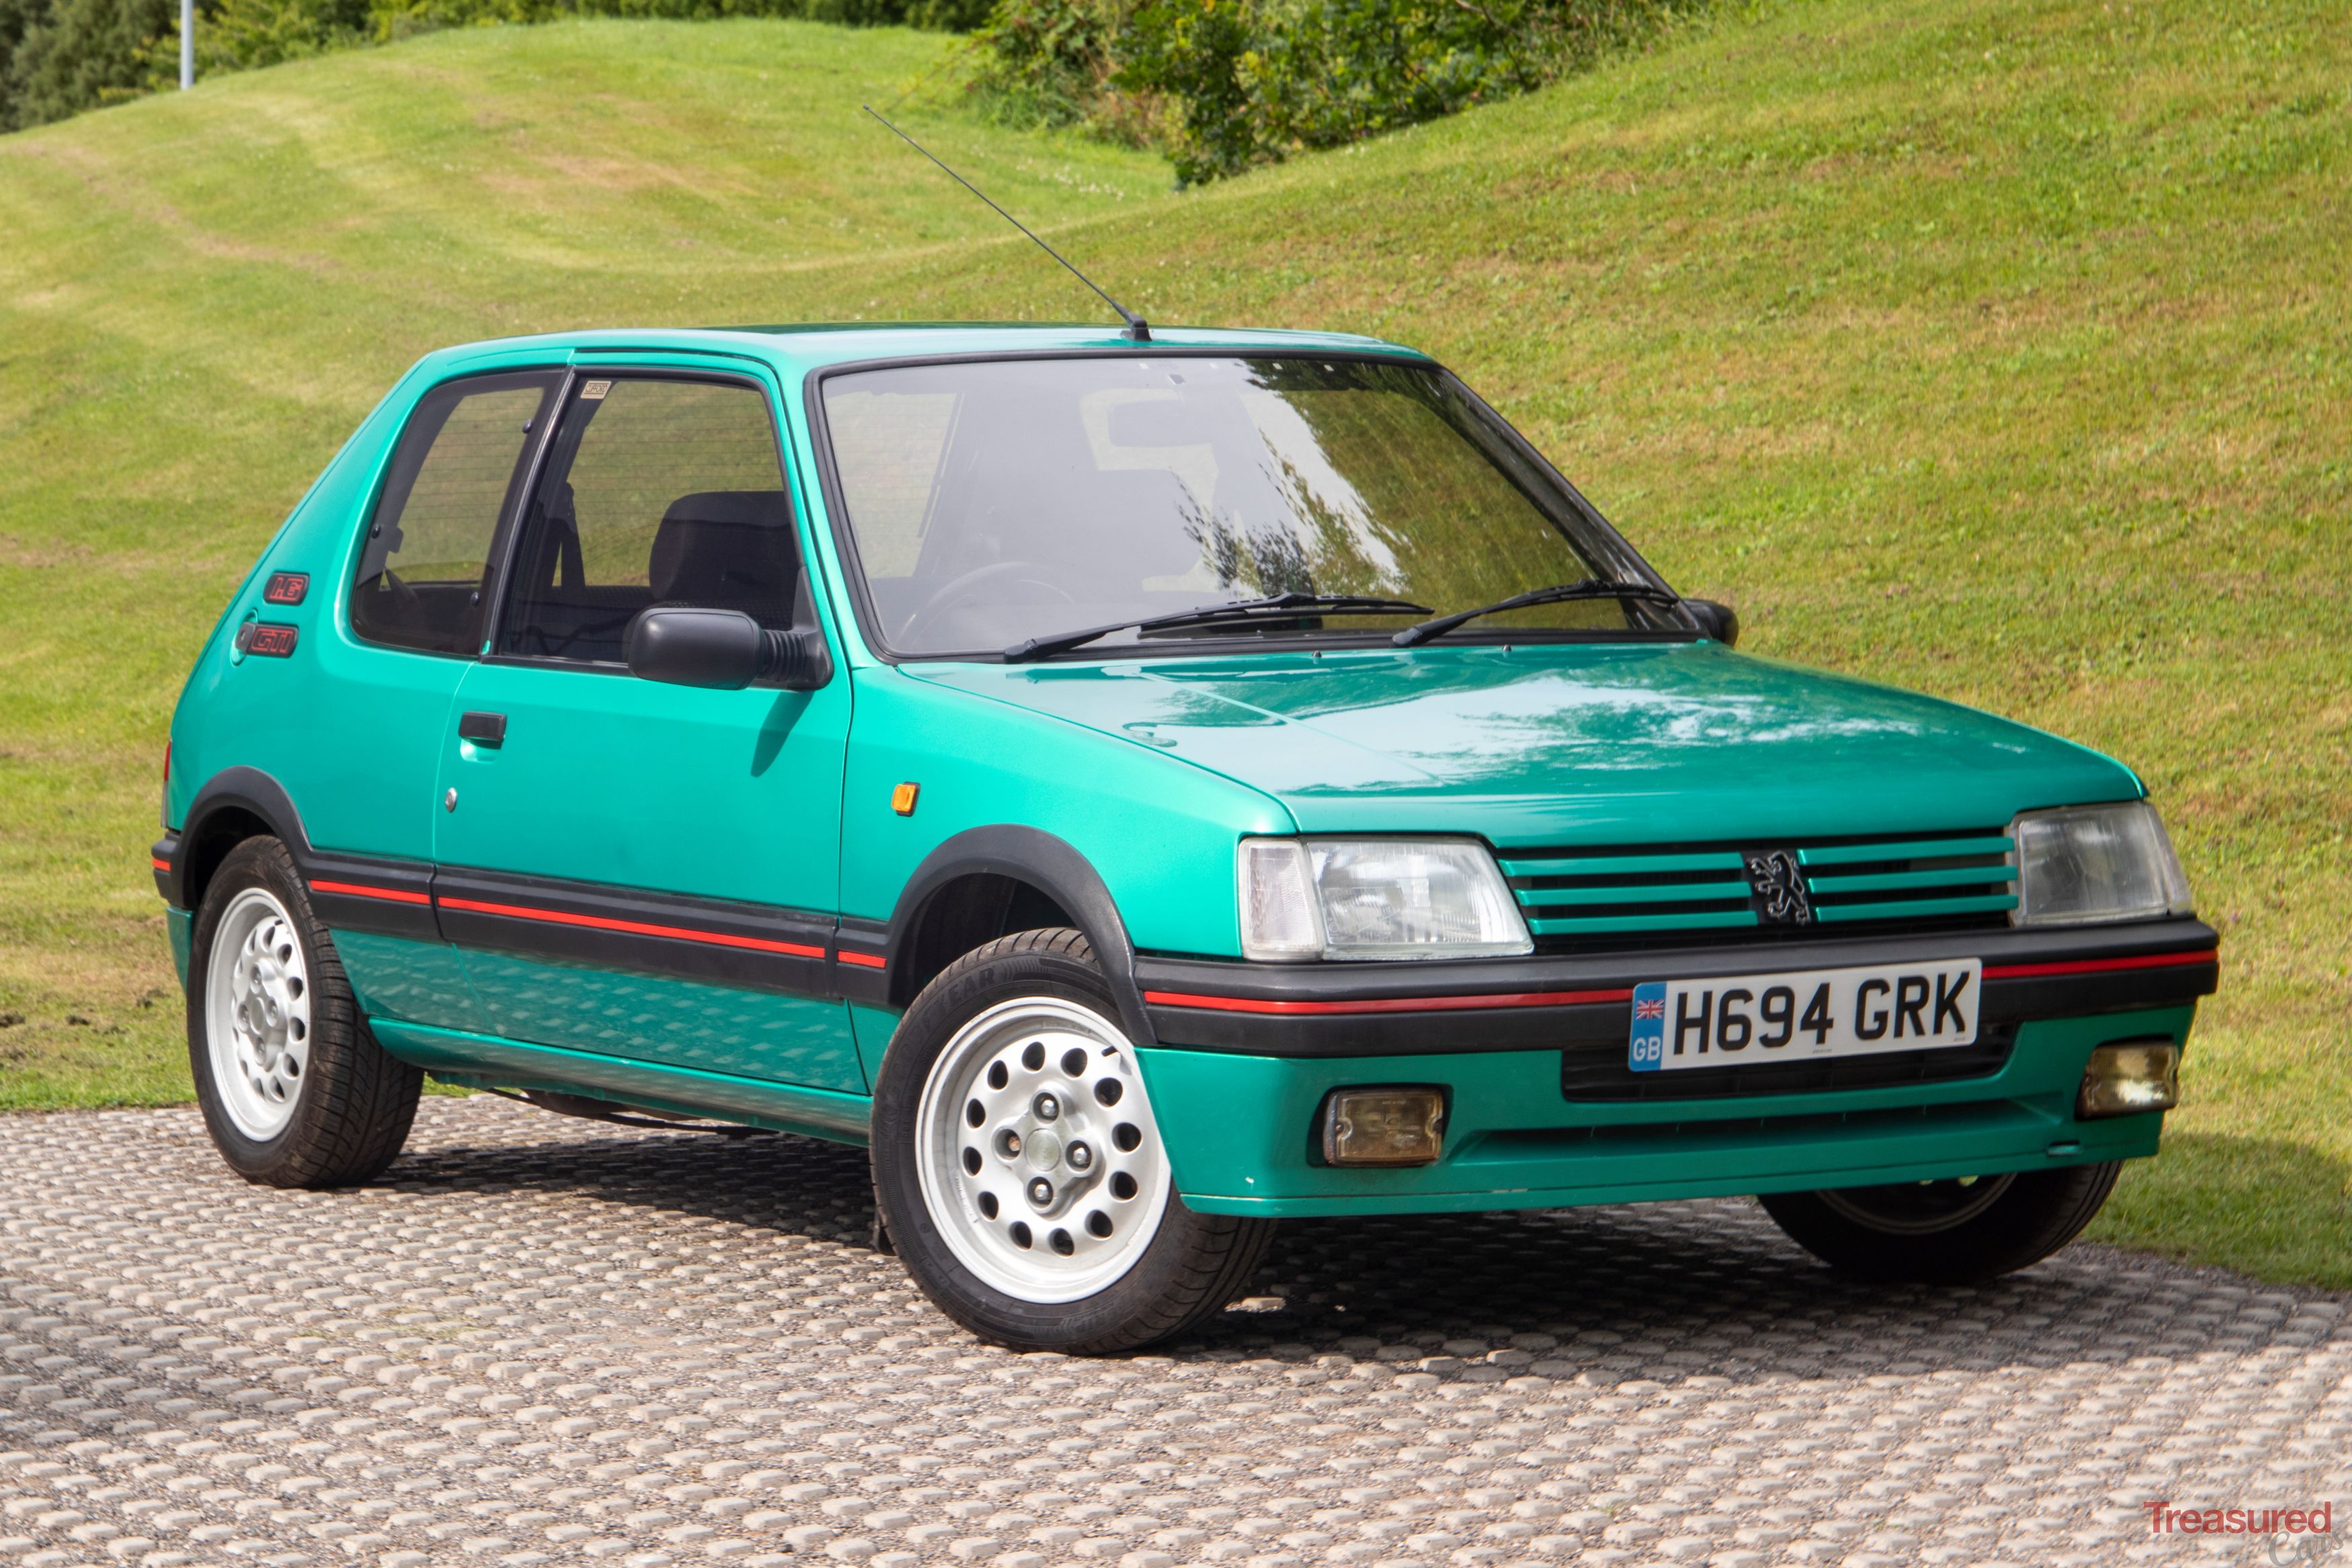 Peugeot 205 Classic Cars for Sale - Classic Trader